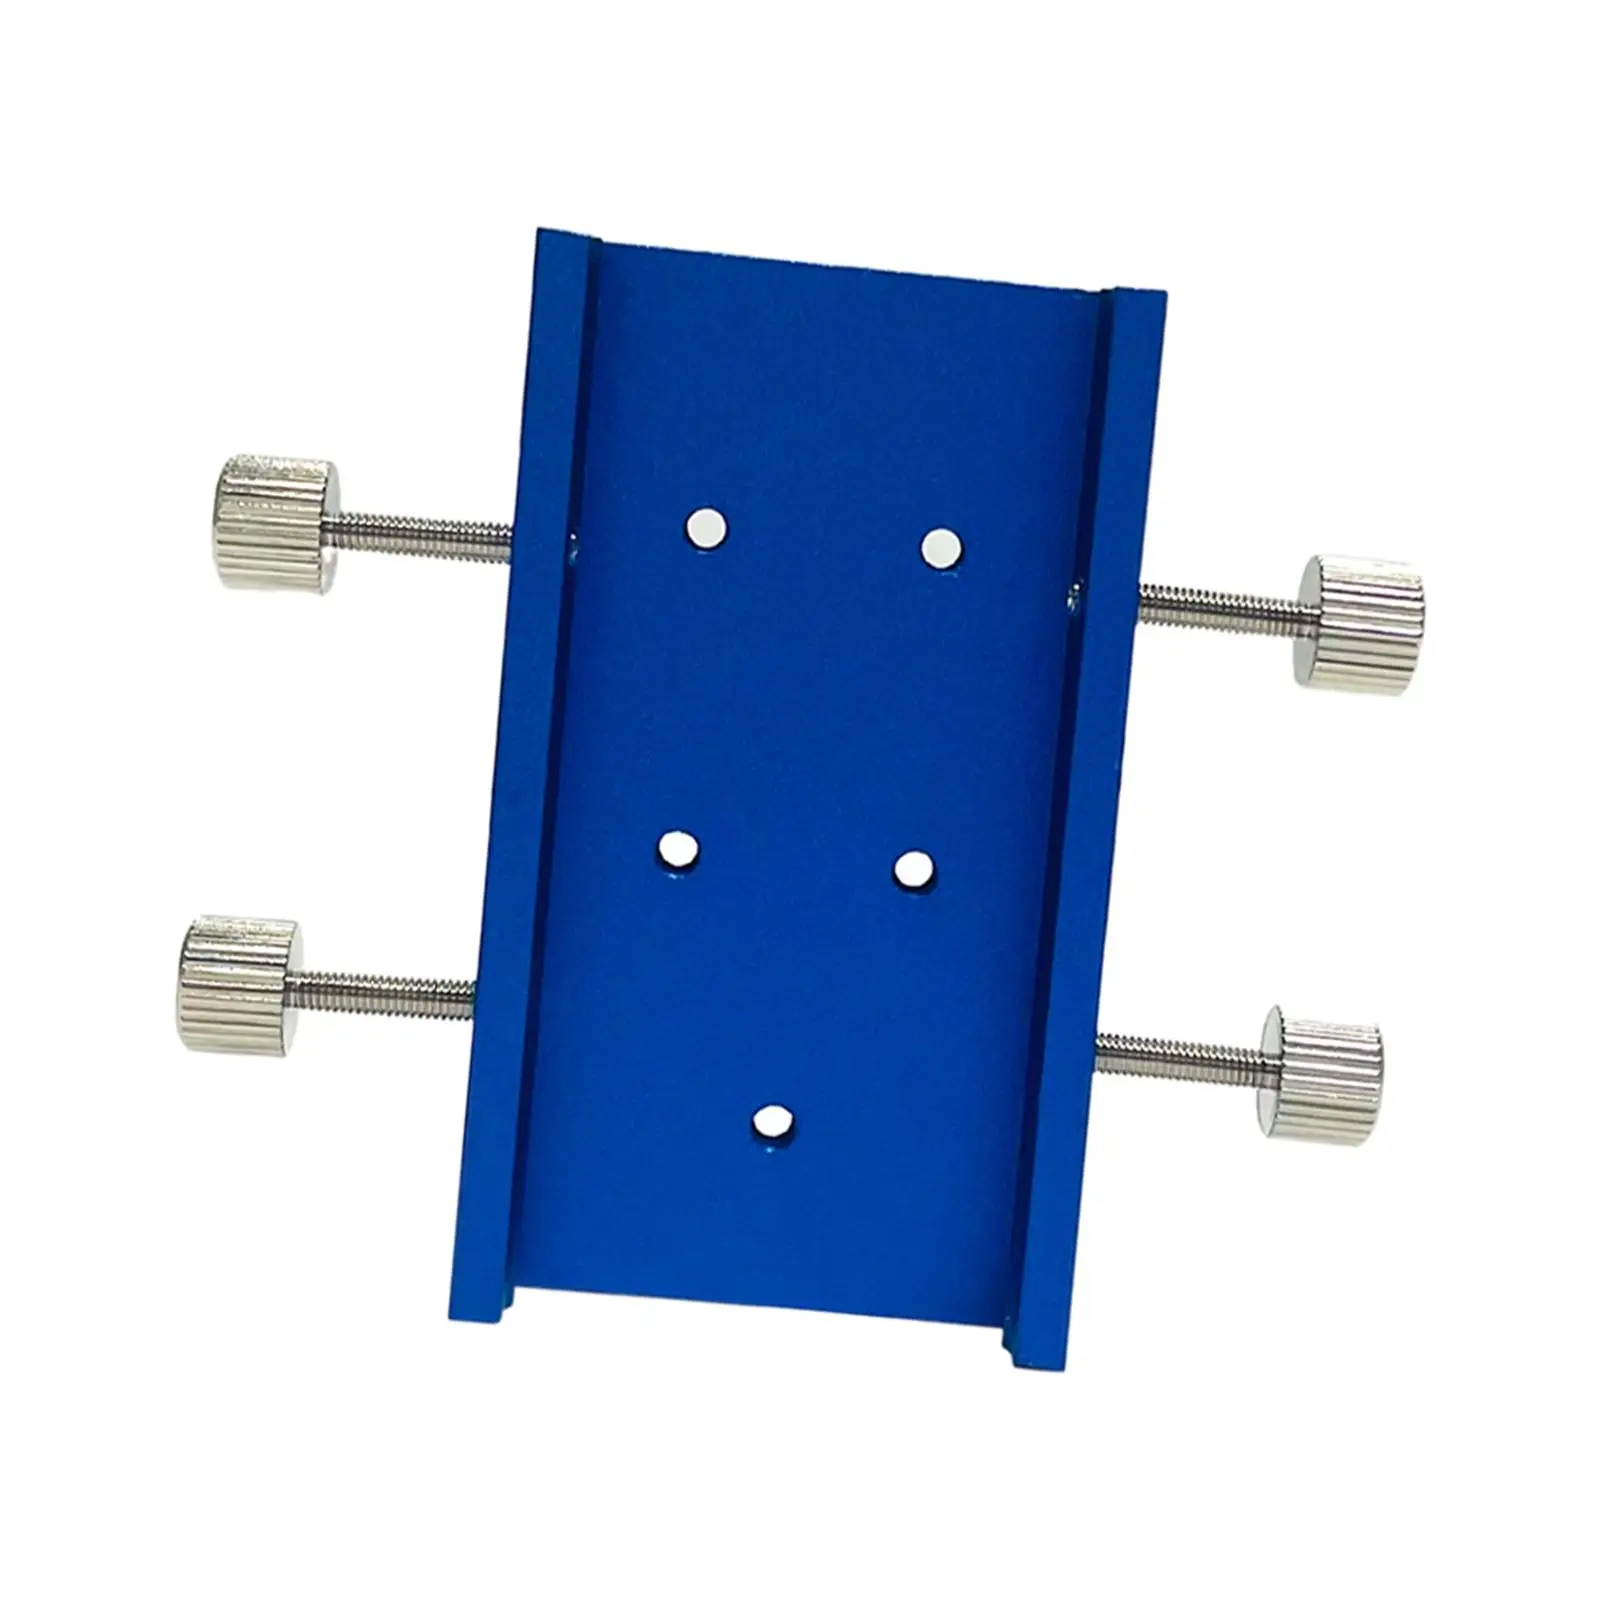  Module Holder Blue Woodworking Machinery Accessories Heat Sink Aluminium Woodworking Machinery Engraver for Router